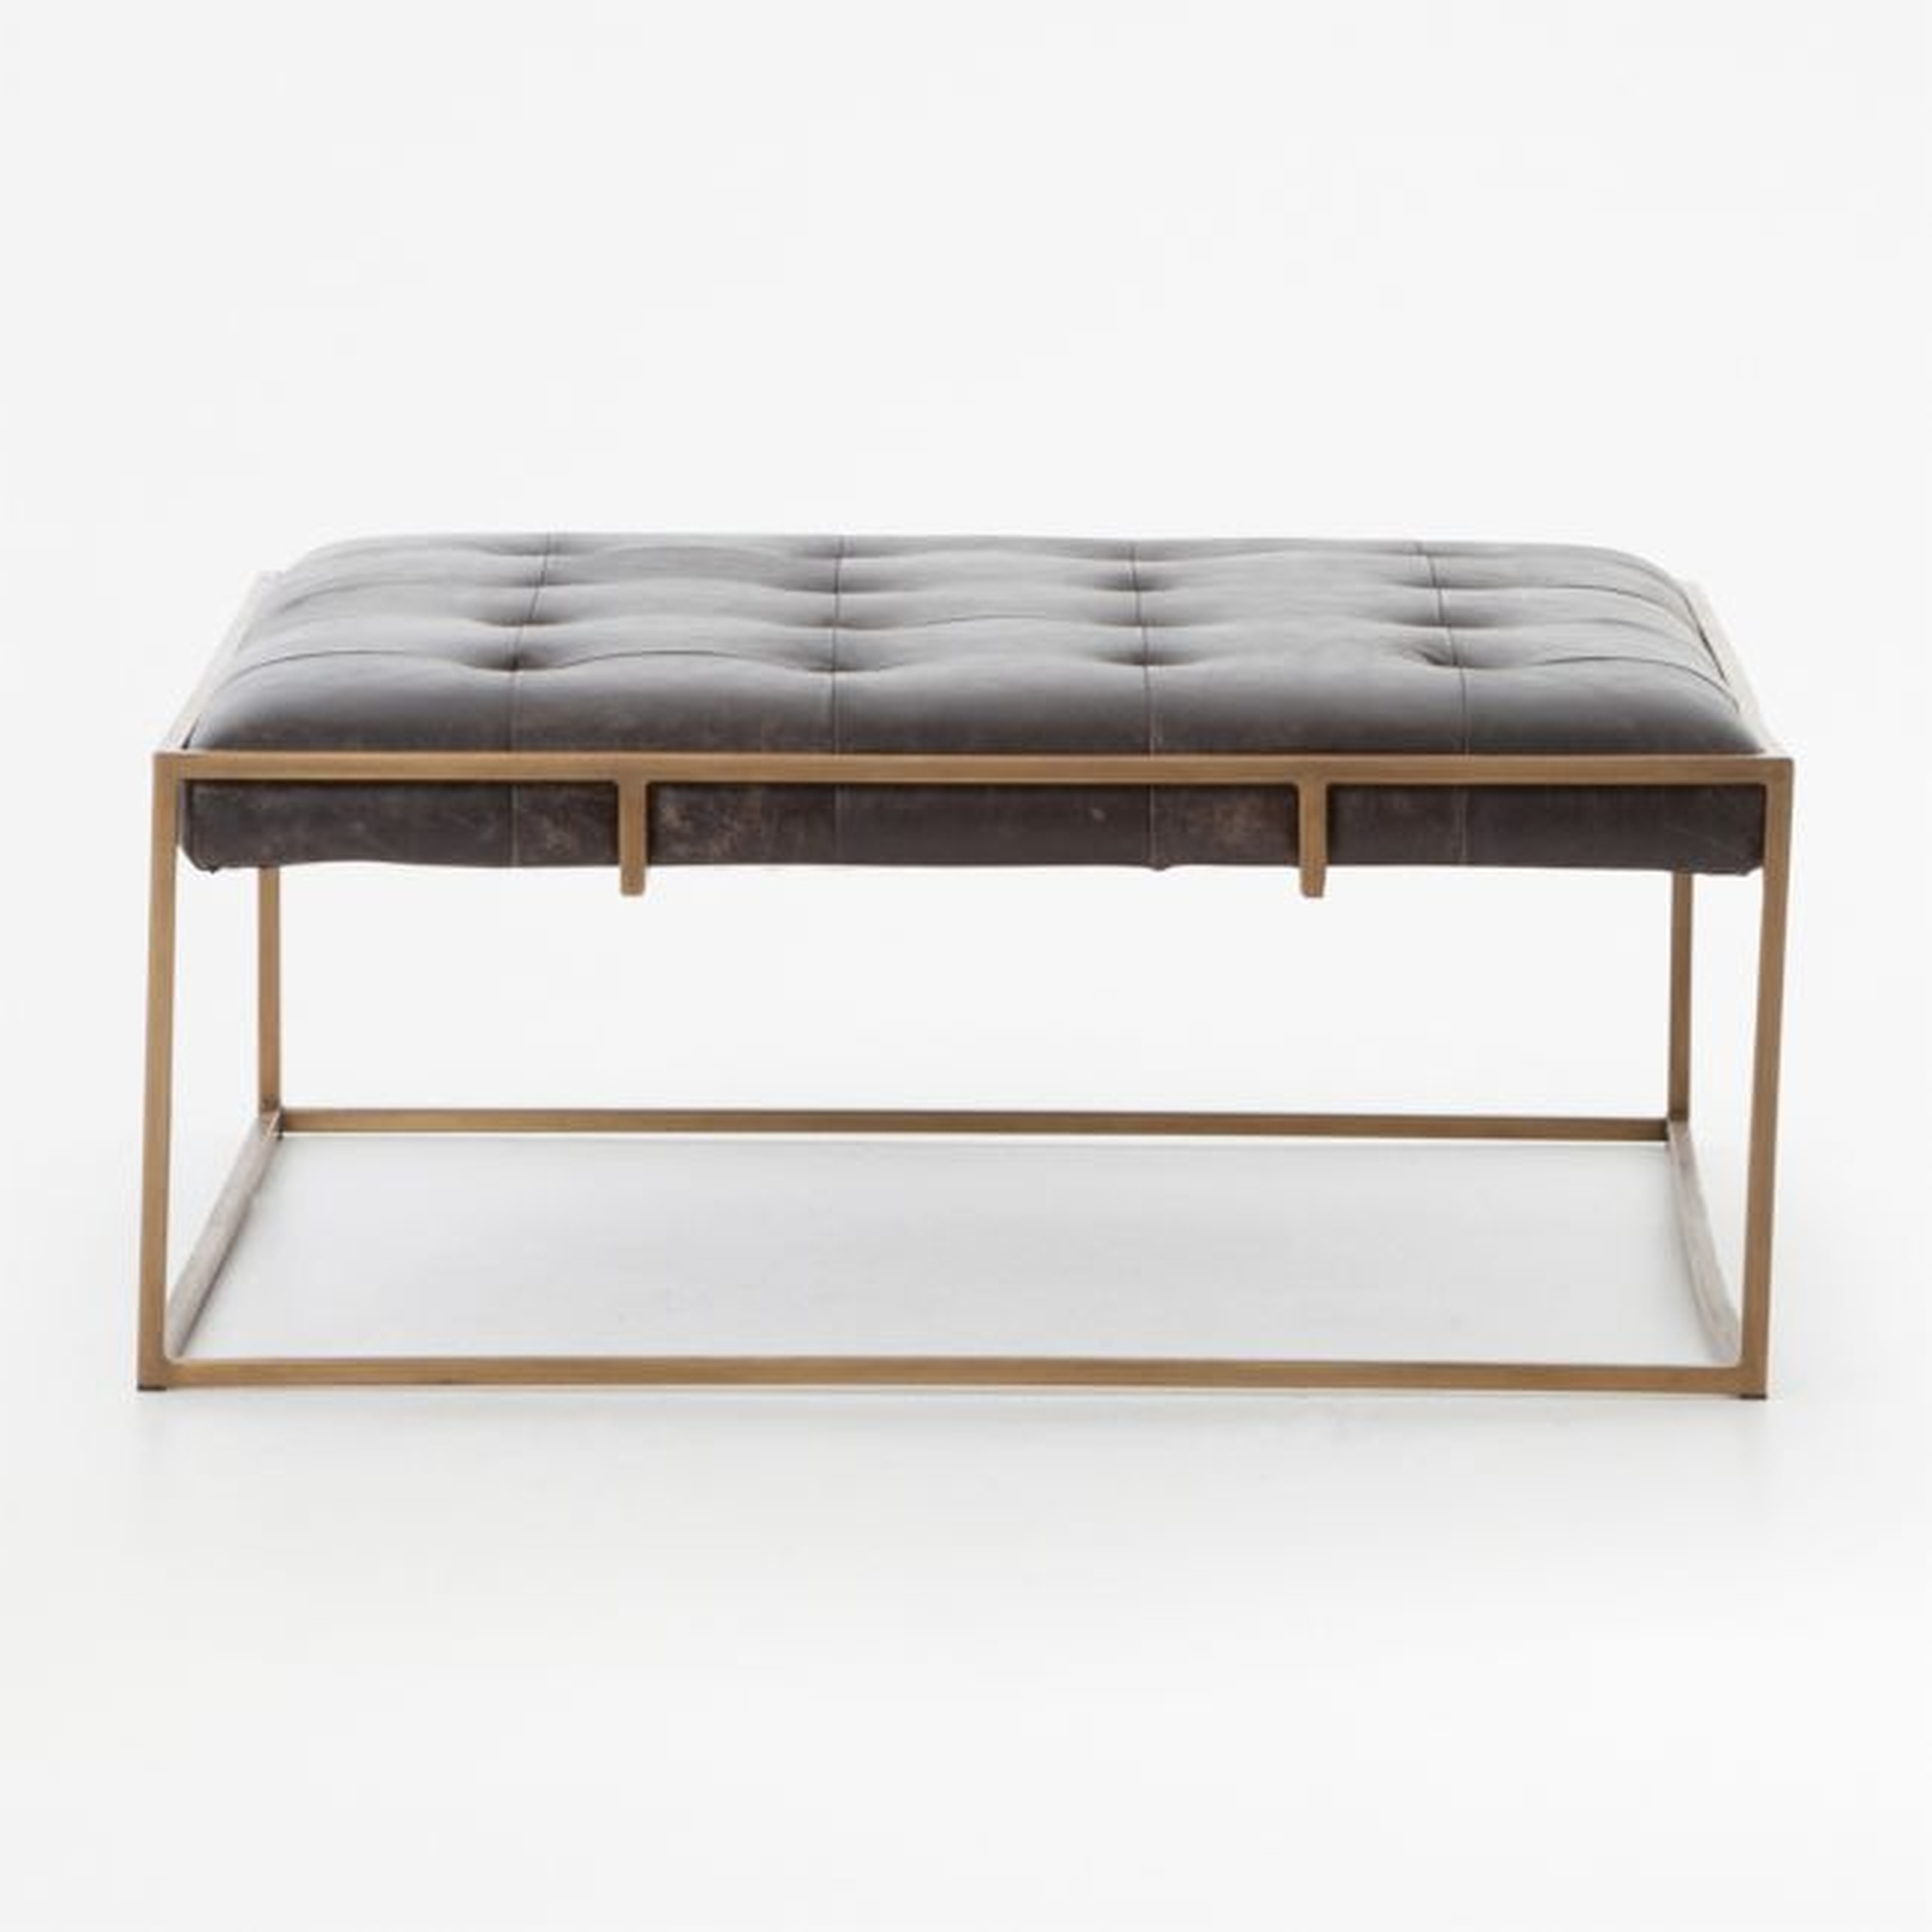 Ottilie Square Leather Coffee Table - Crate and Barrel